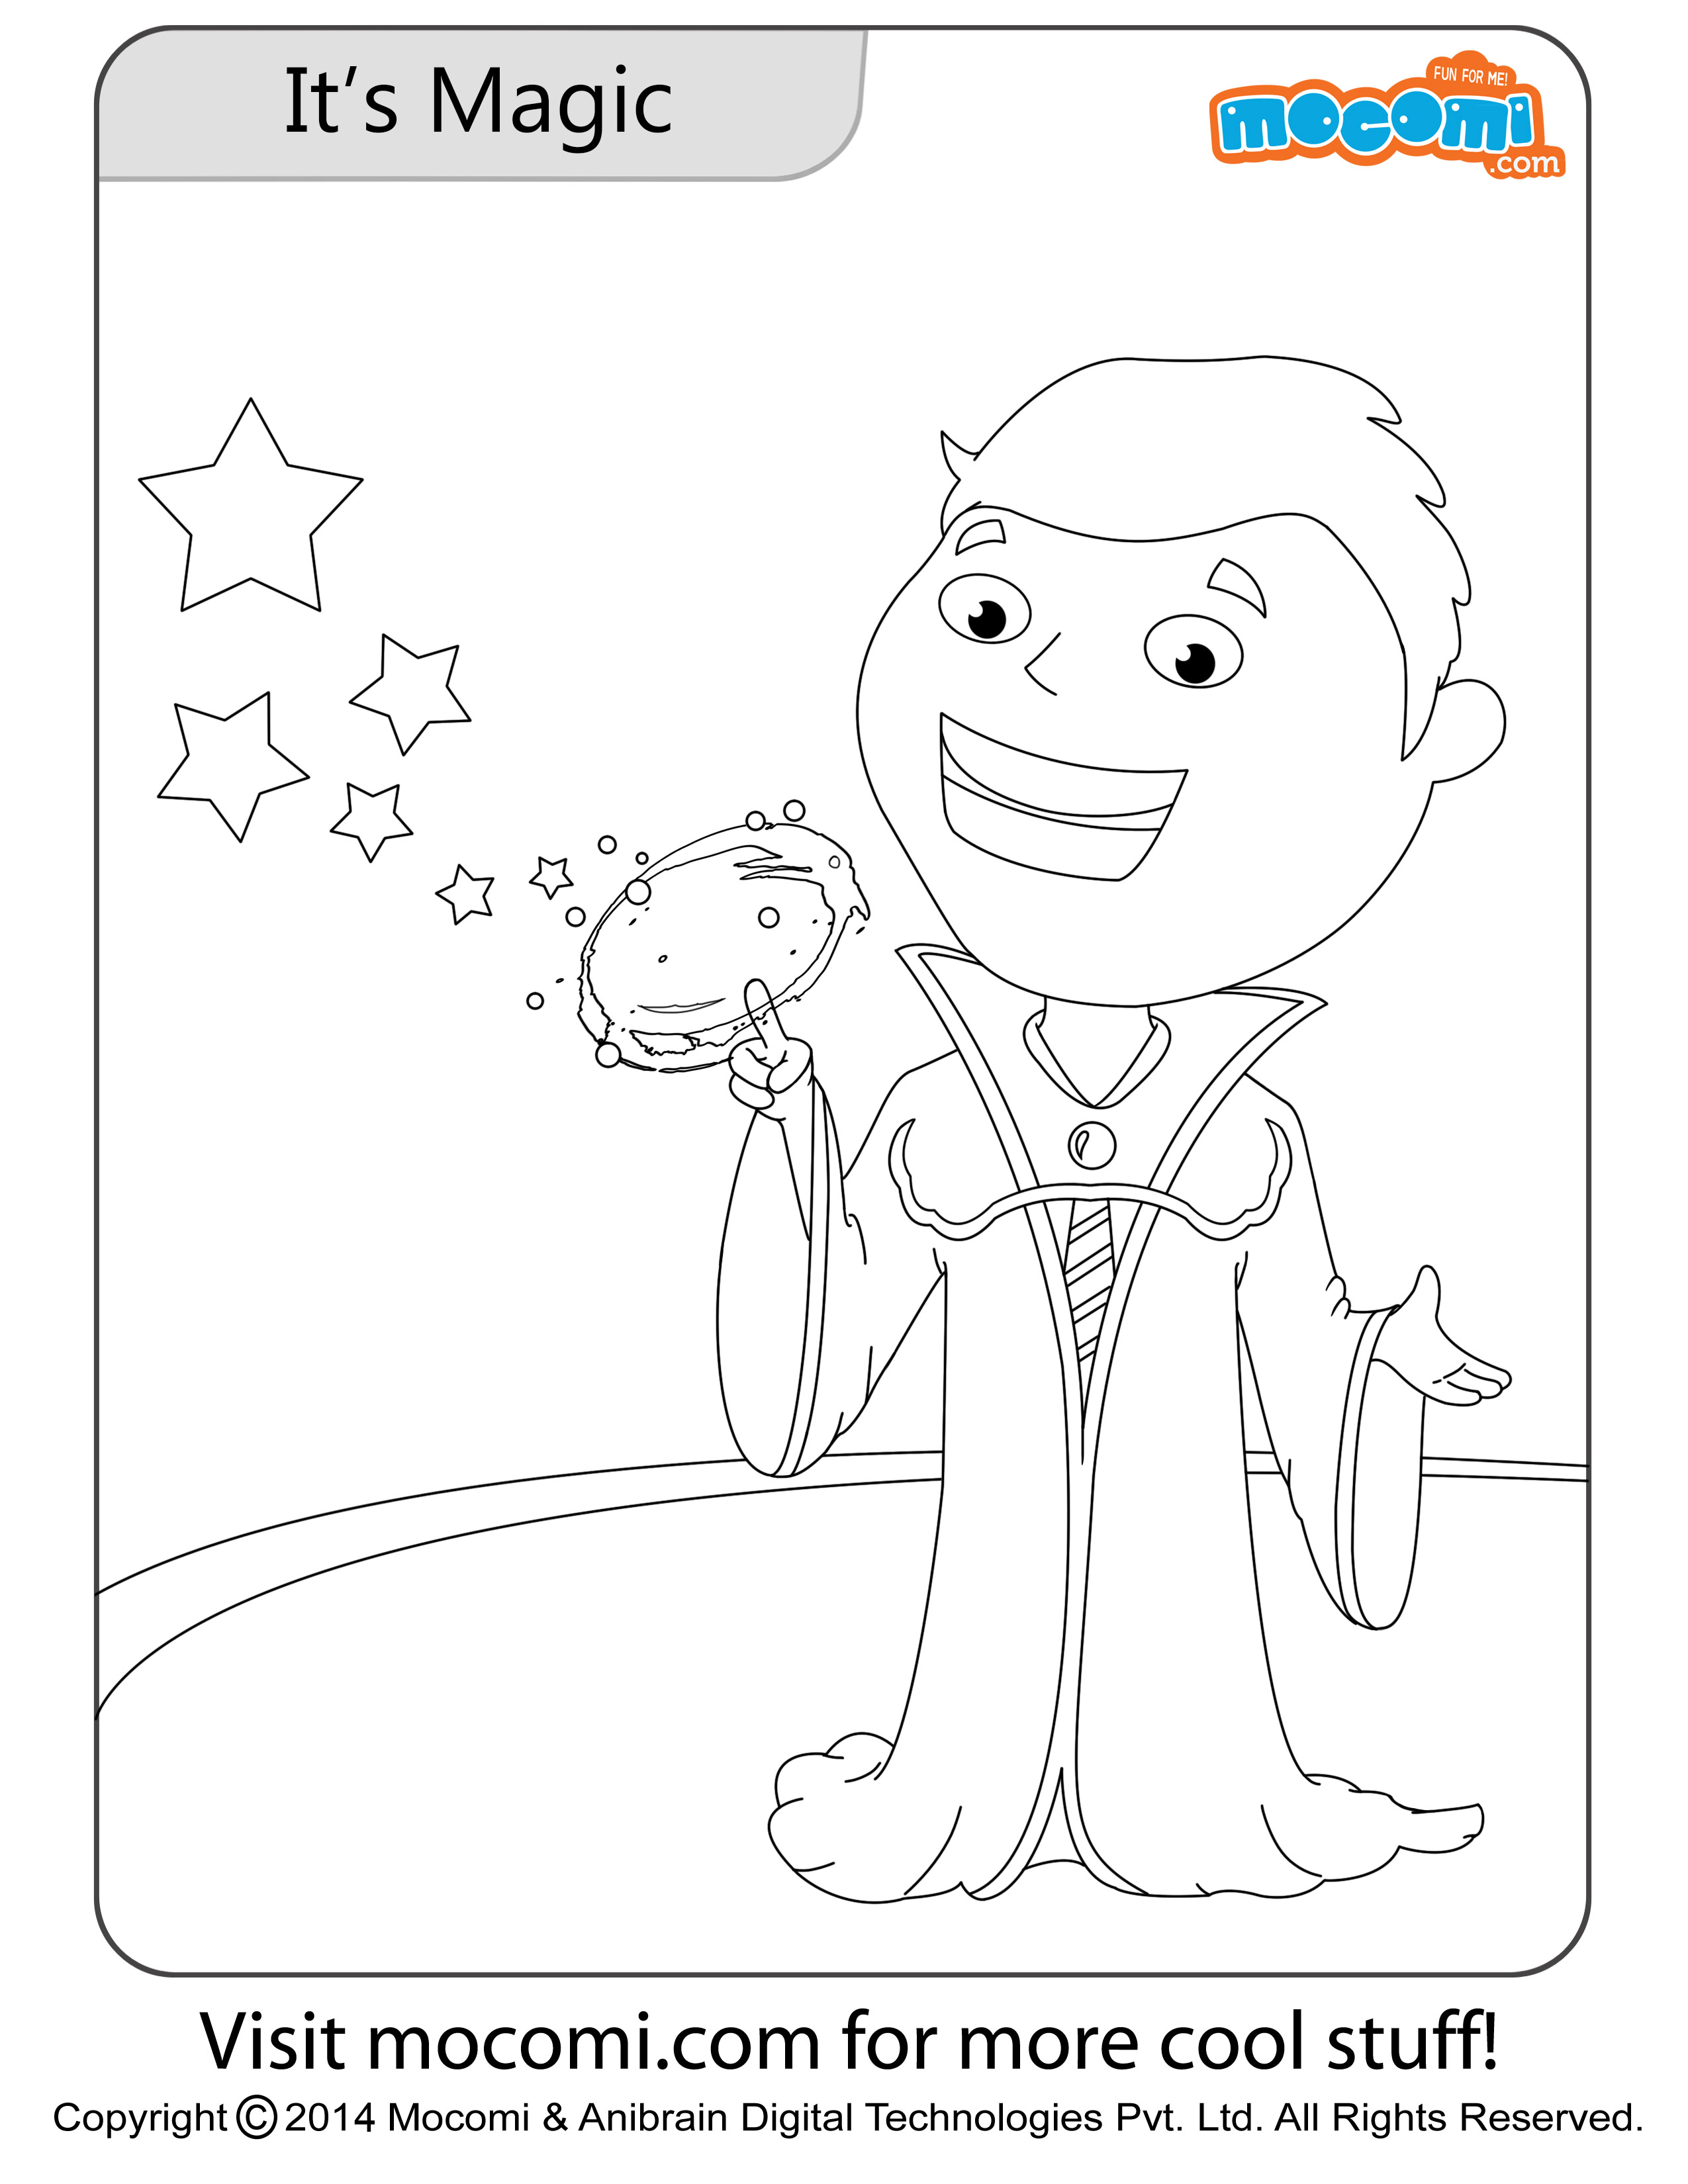 Jojo and Tricks Go Together – Colouring Page